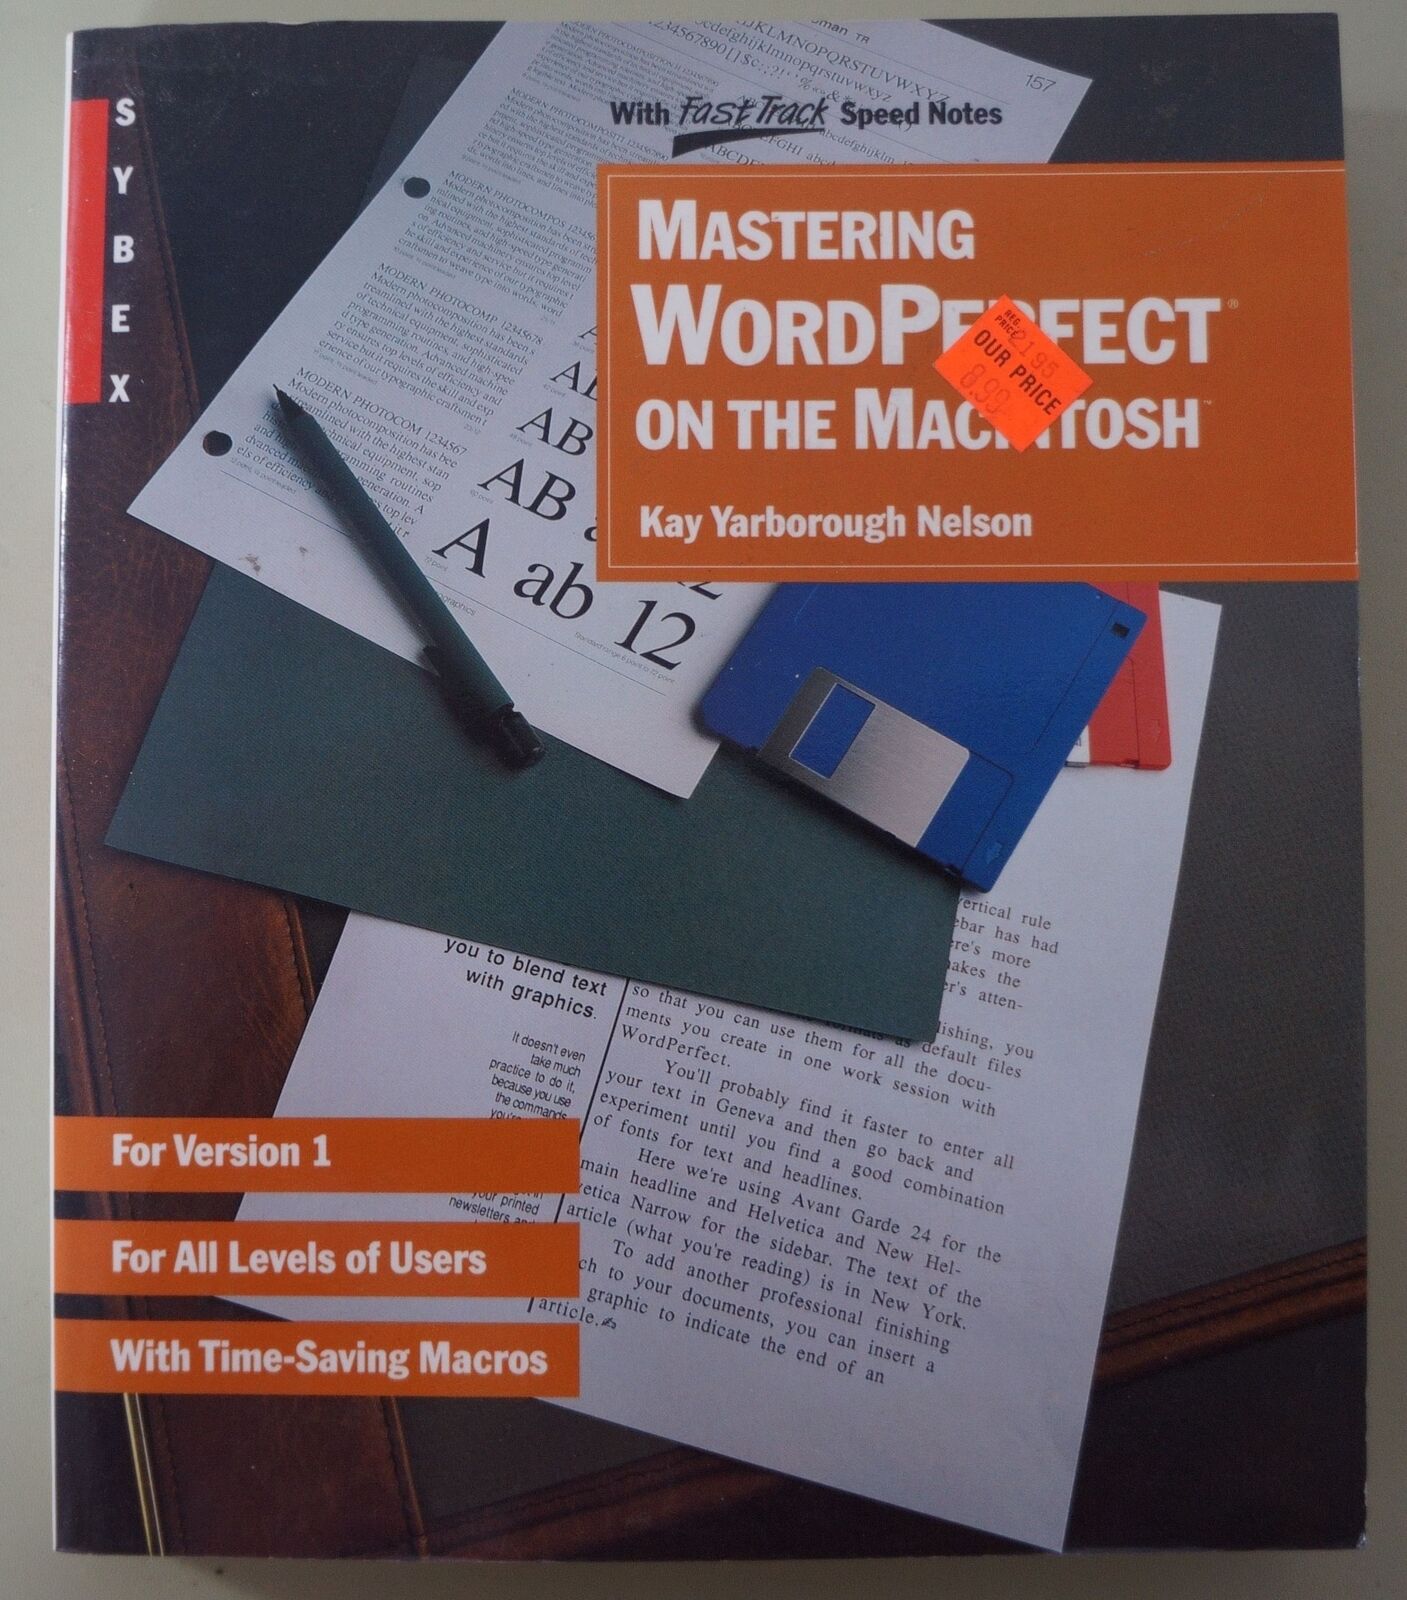 Mastering WordPerfect on The Macintosh for Version 1 - Sybex - 1988